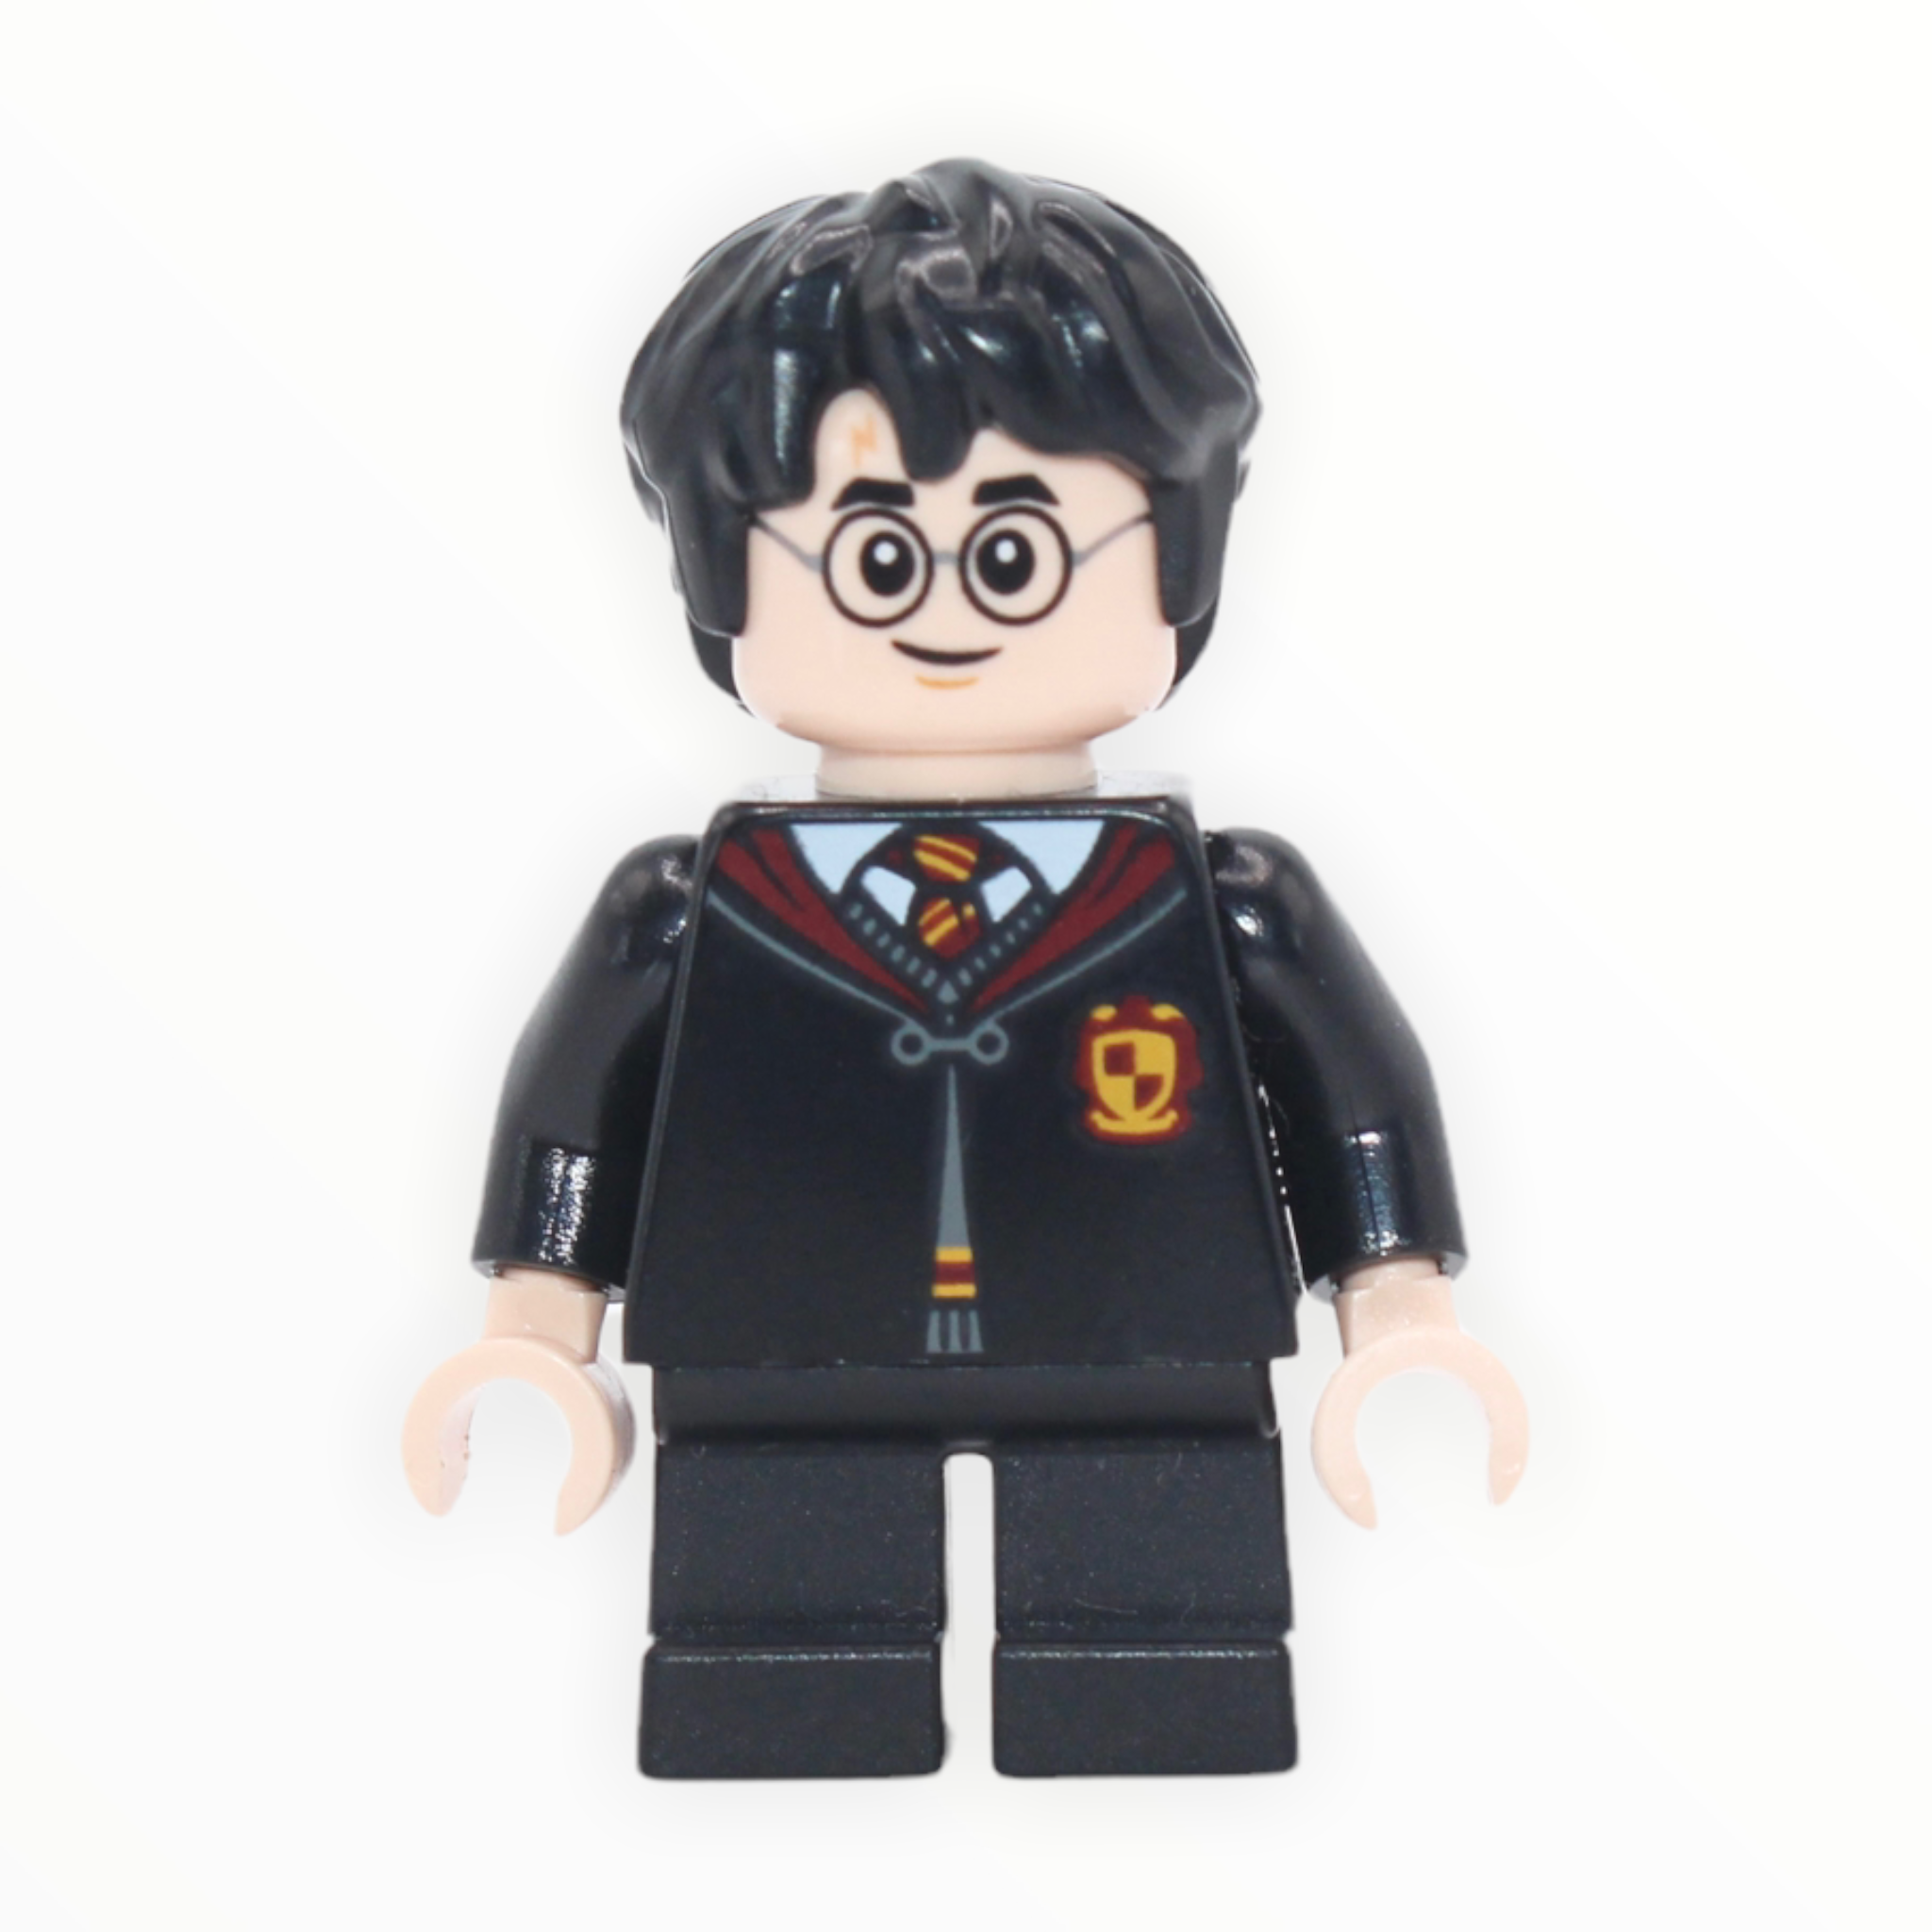 Harry Potter (Gryffindor clasped robe, sweater, short legs, 2021)